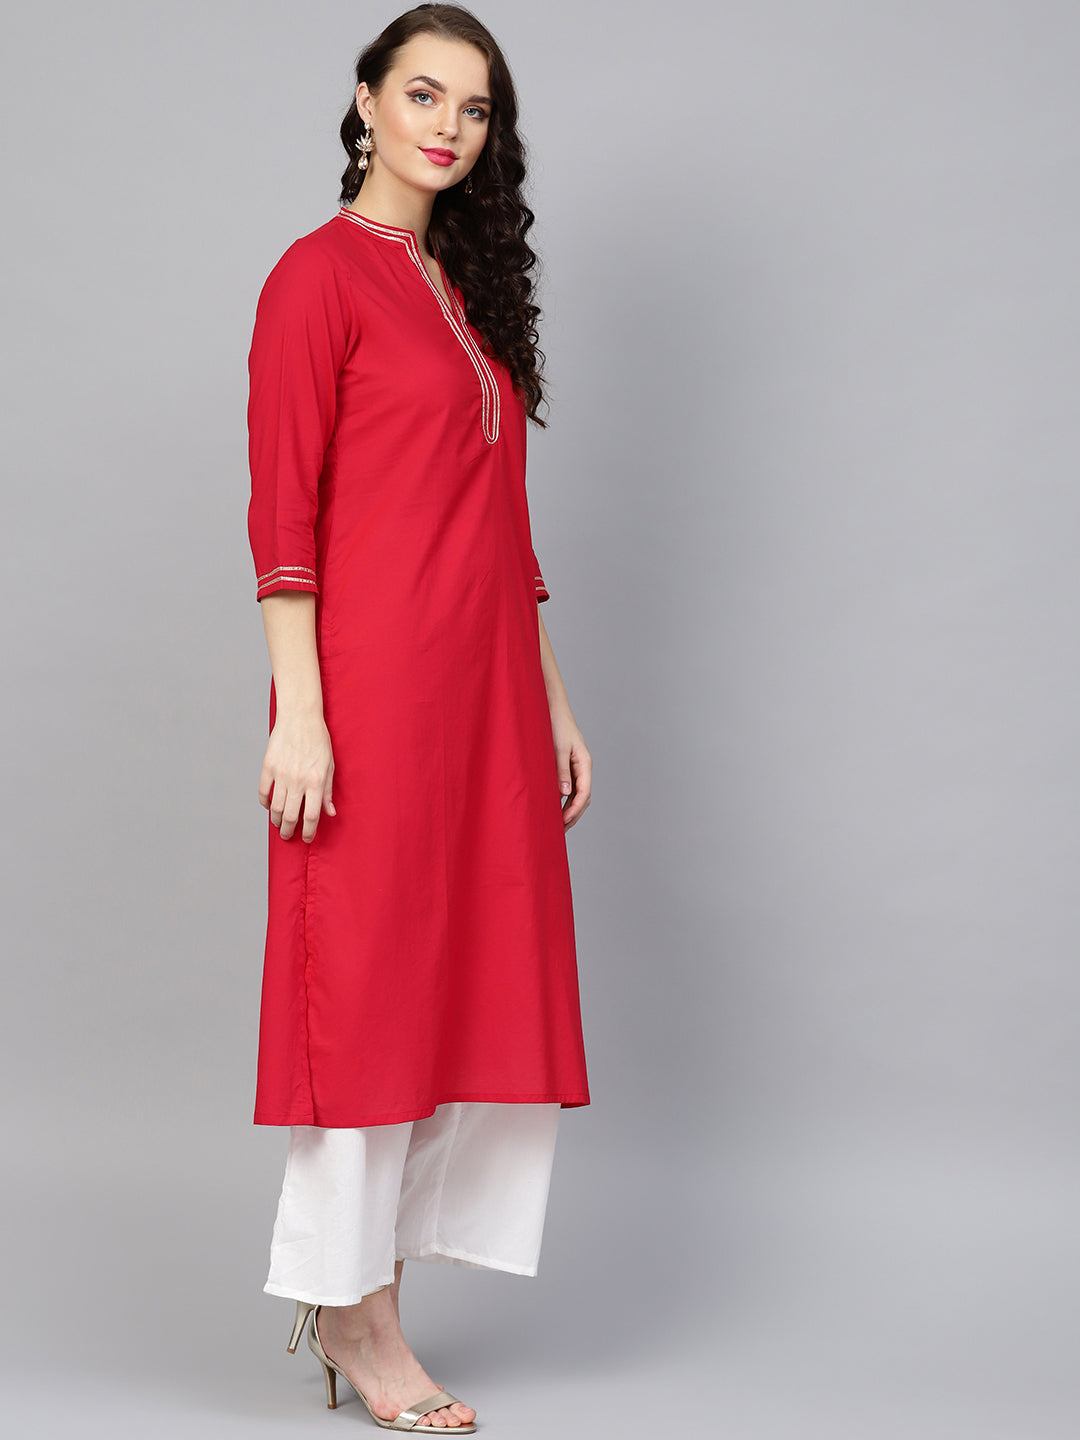 Women's Red Solid Kurta With Off White Solid Palazzos - Bhama Couture